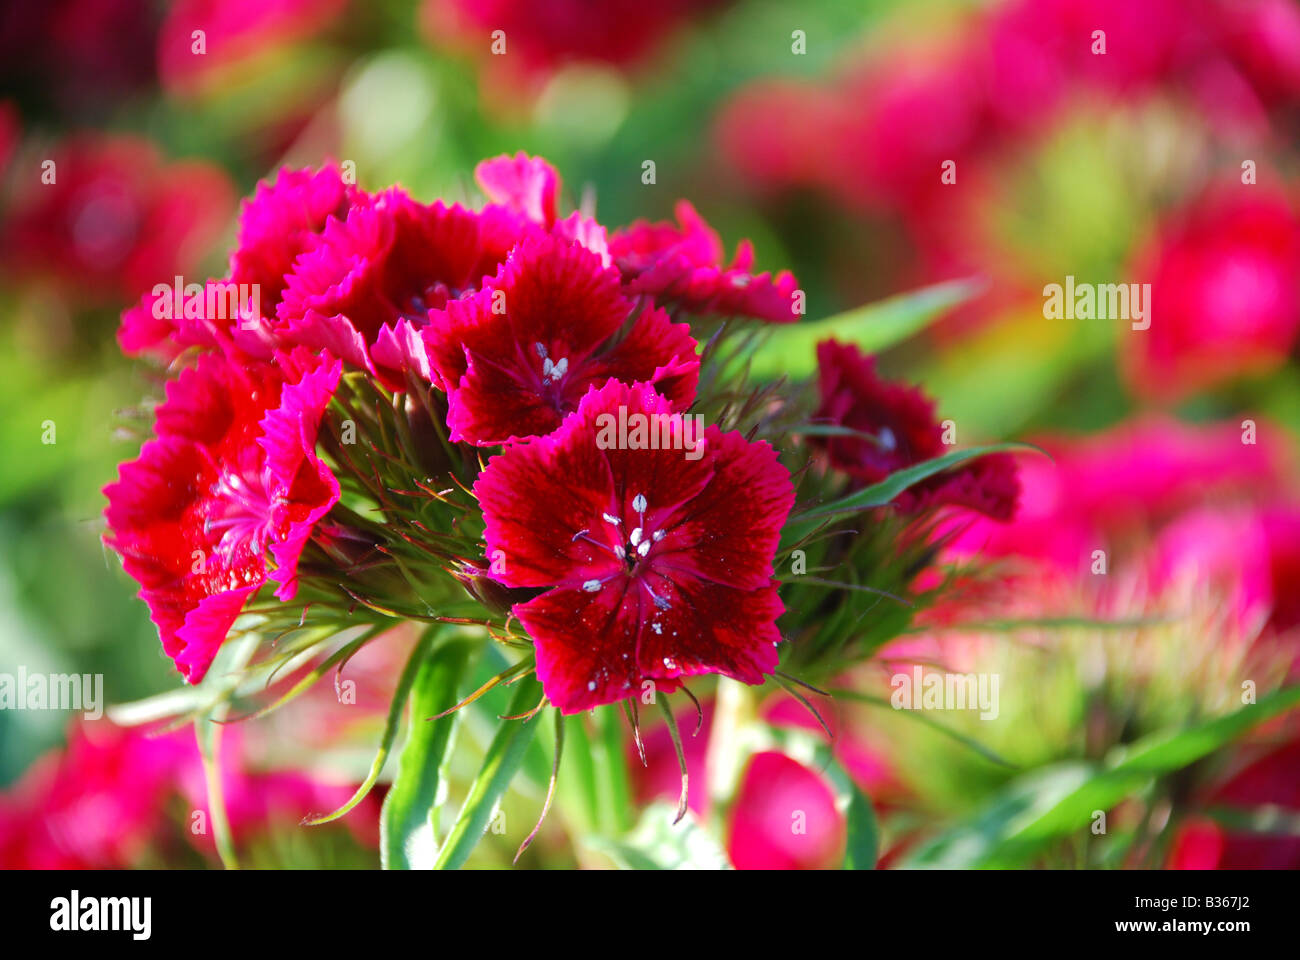 CLOSE-UP OF RED WILD FLOWERS Stock Photo